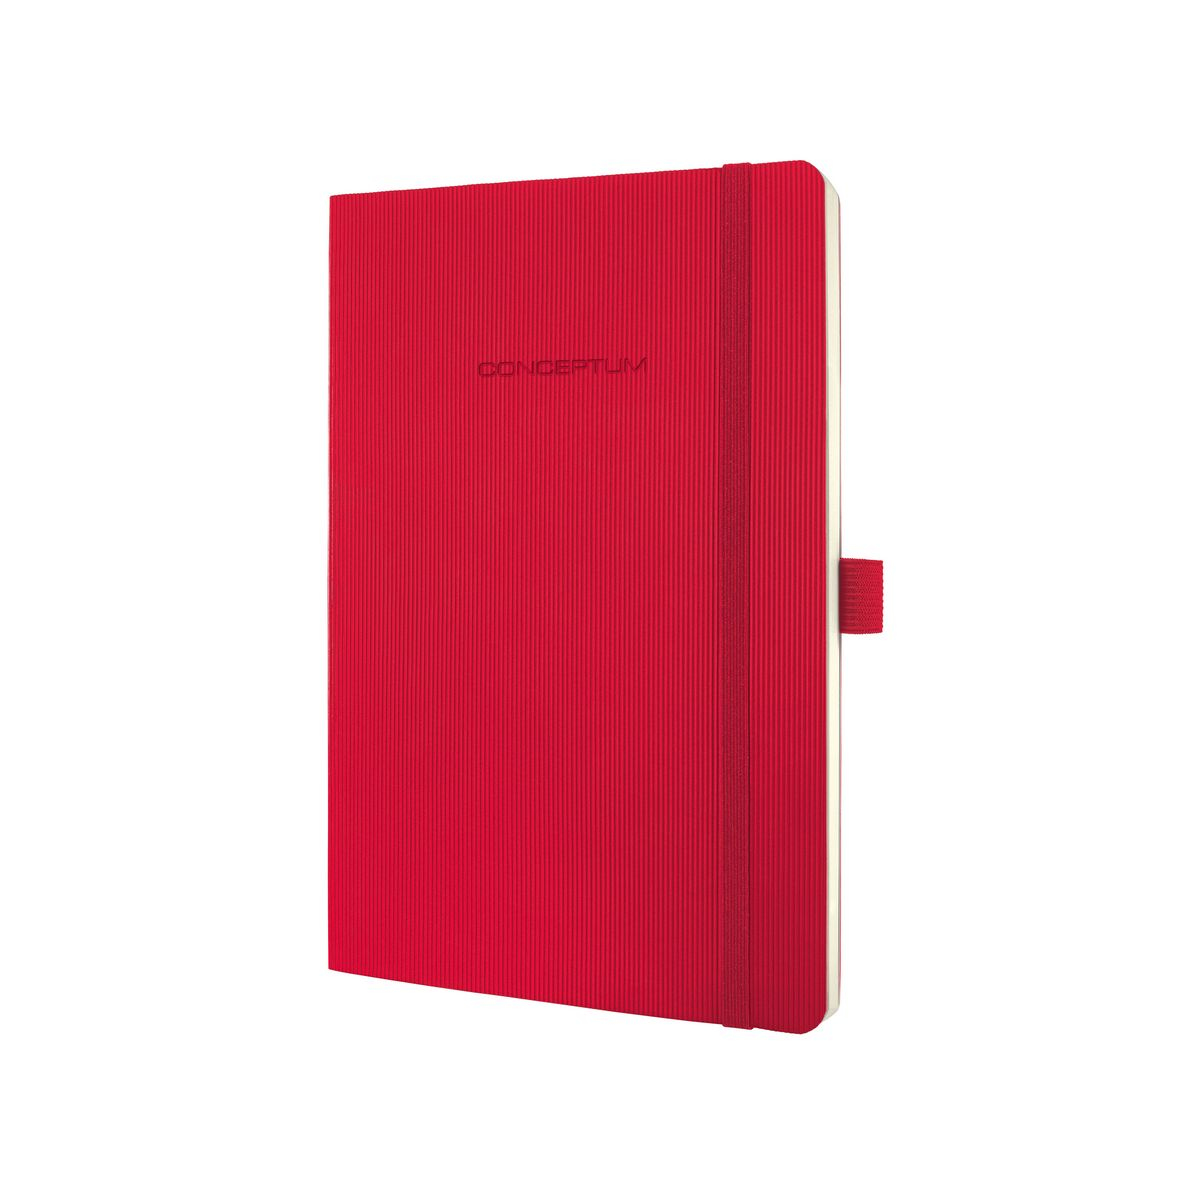 Sigel Conceptum writing notebook A5 194 sheets Red